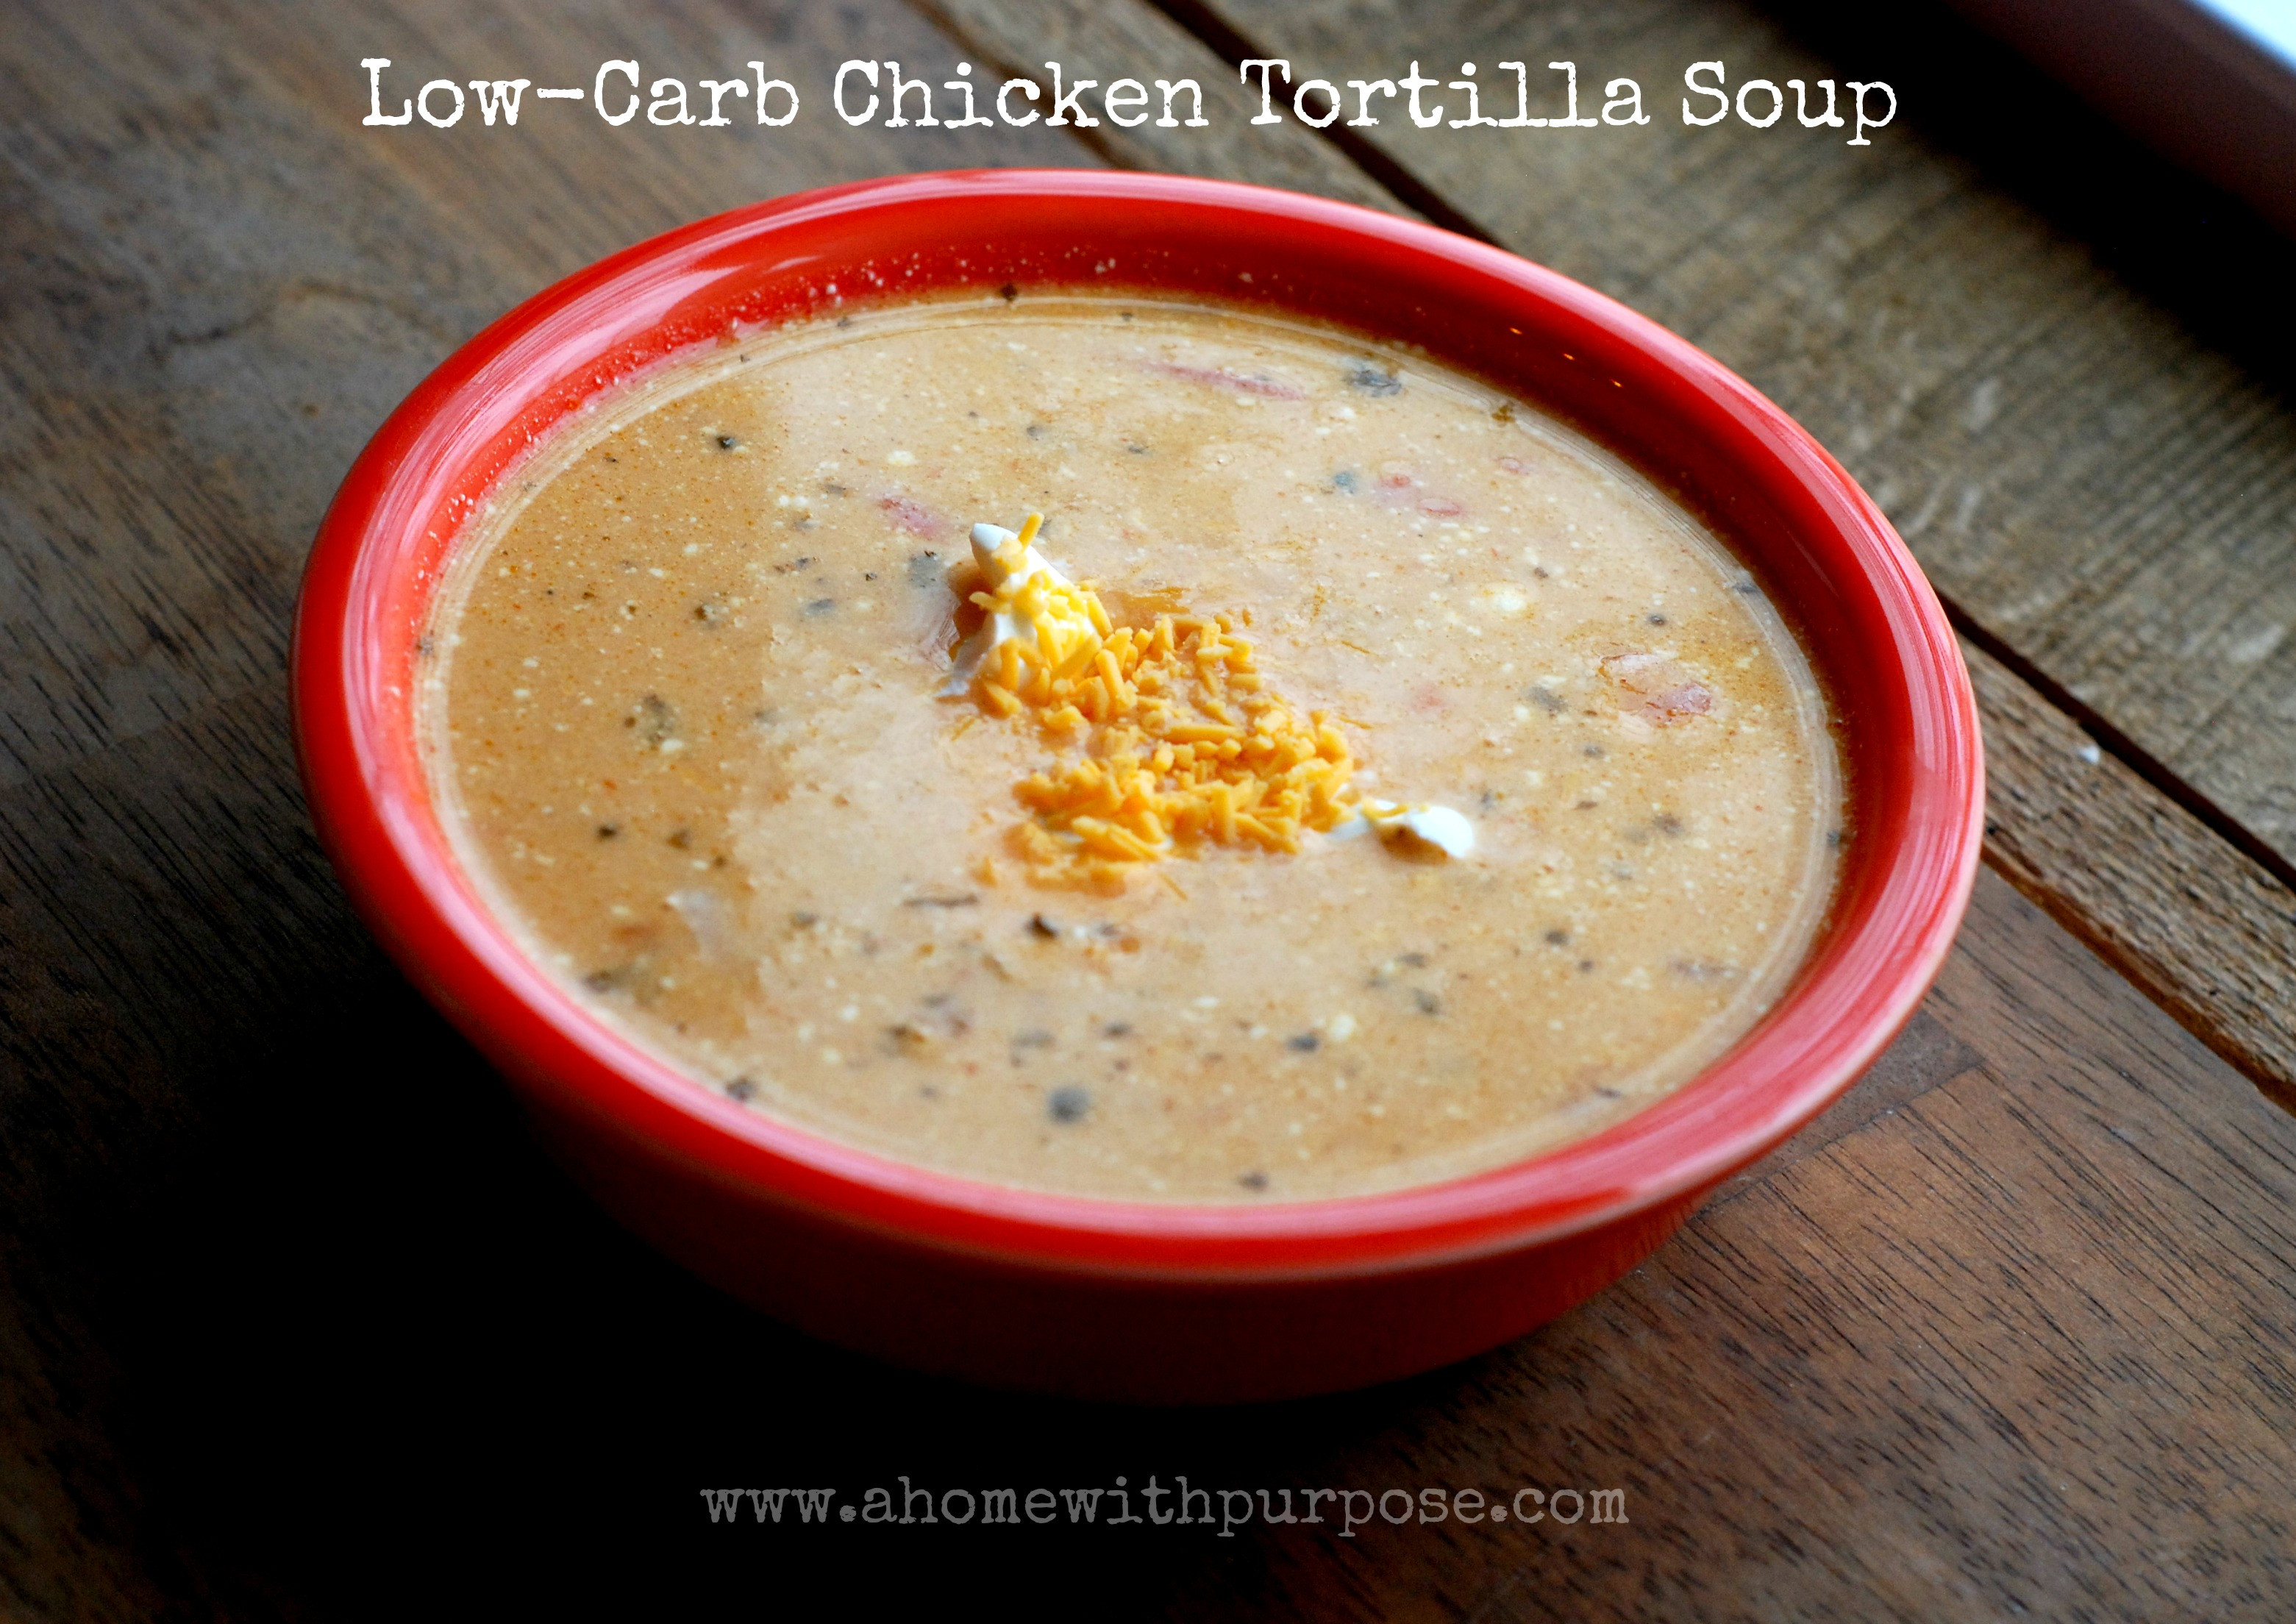 Low Fat Chicken Tortilla Soup
 Low Carb Chicken Tortilla Soup S FP or E A Home with